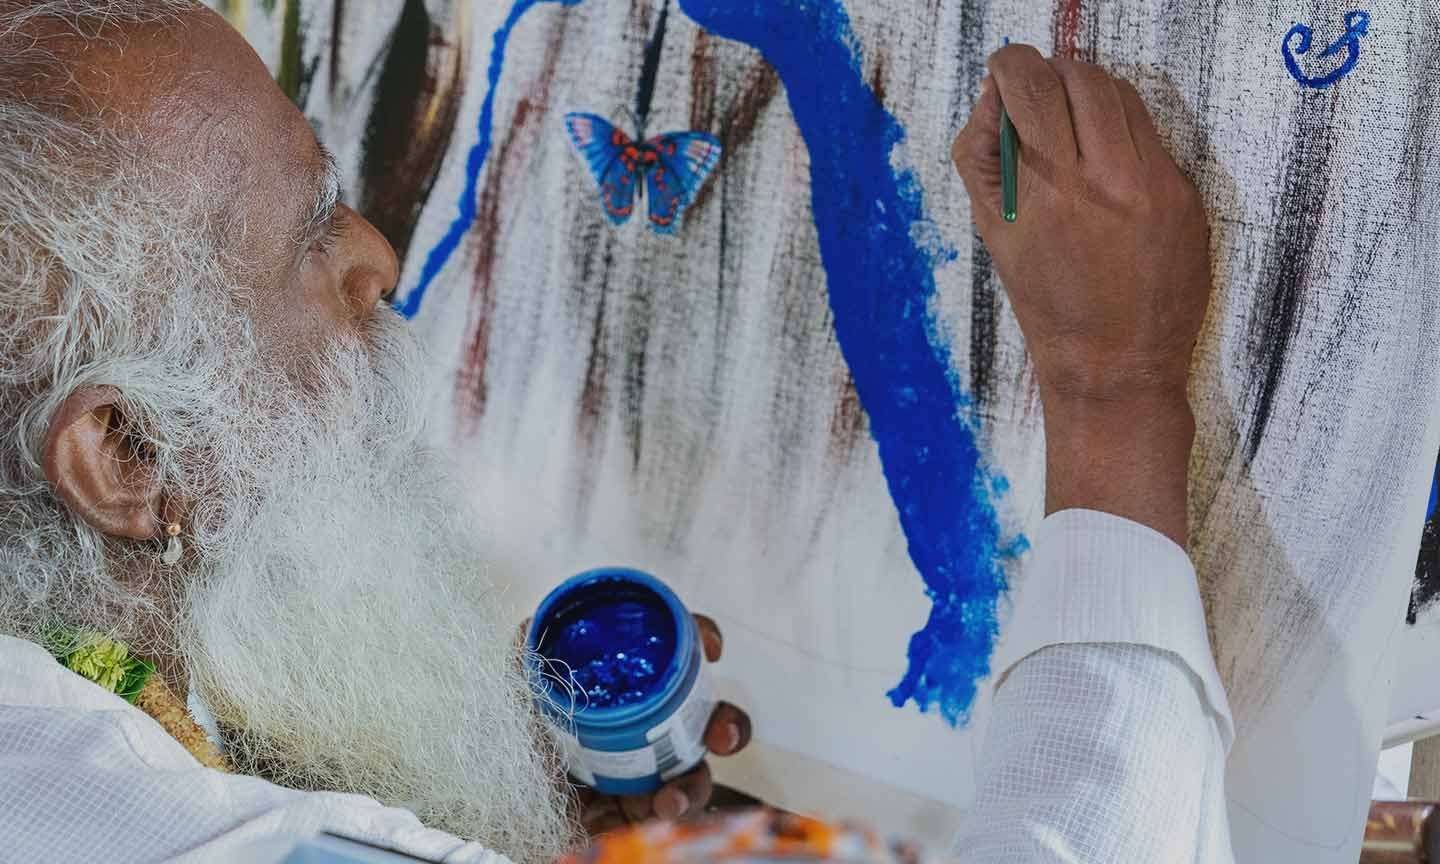 Sadhguru’s Painting Auctioned For Rs 4.14 Crore